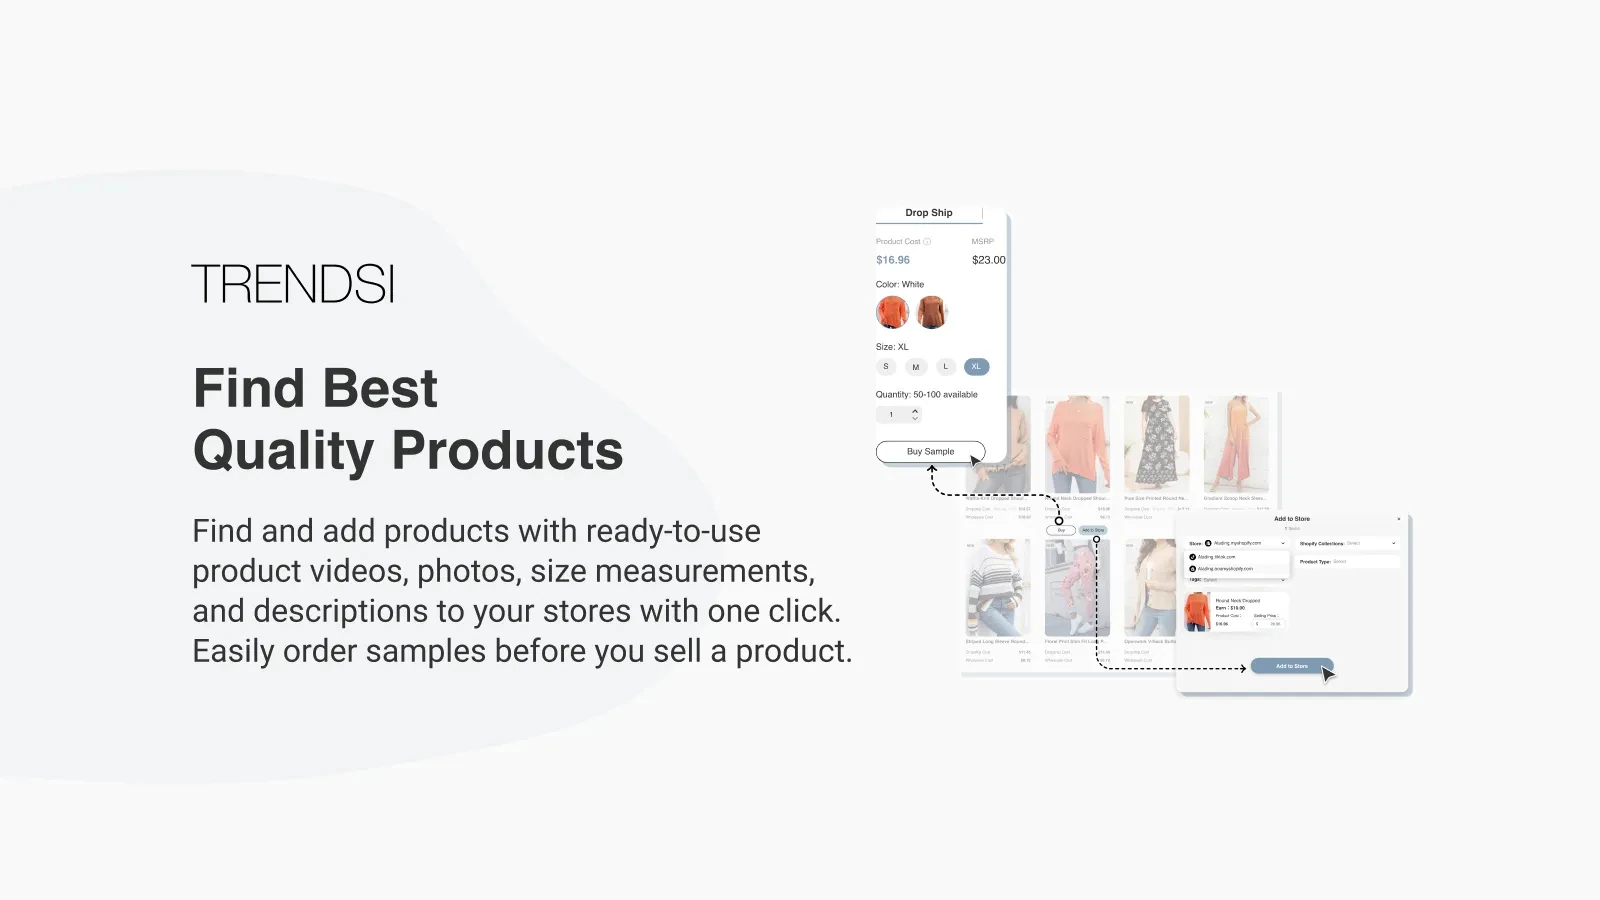 Trendsi lets you find and import fashion products into your store hassle-free.